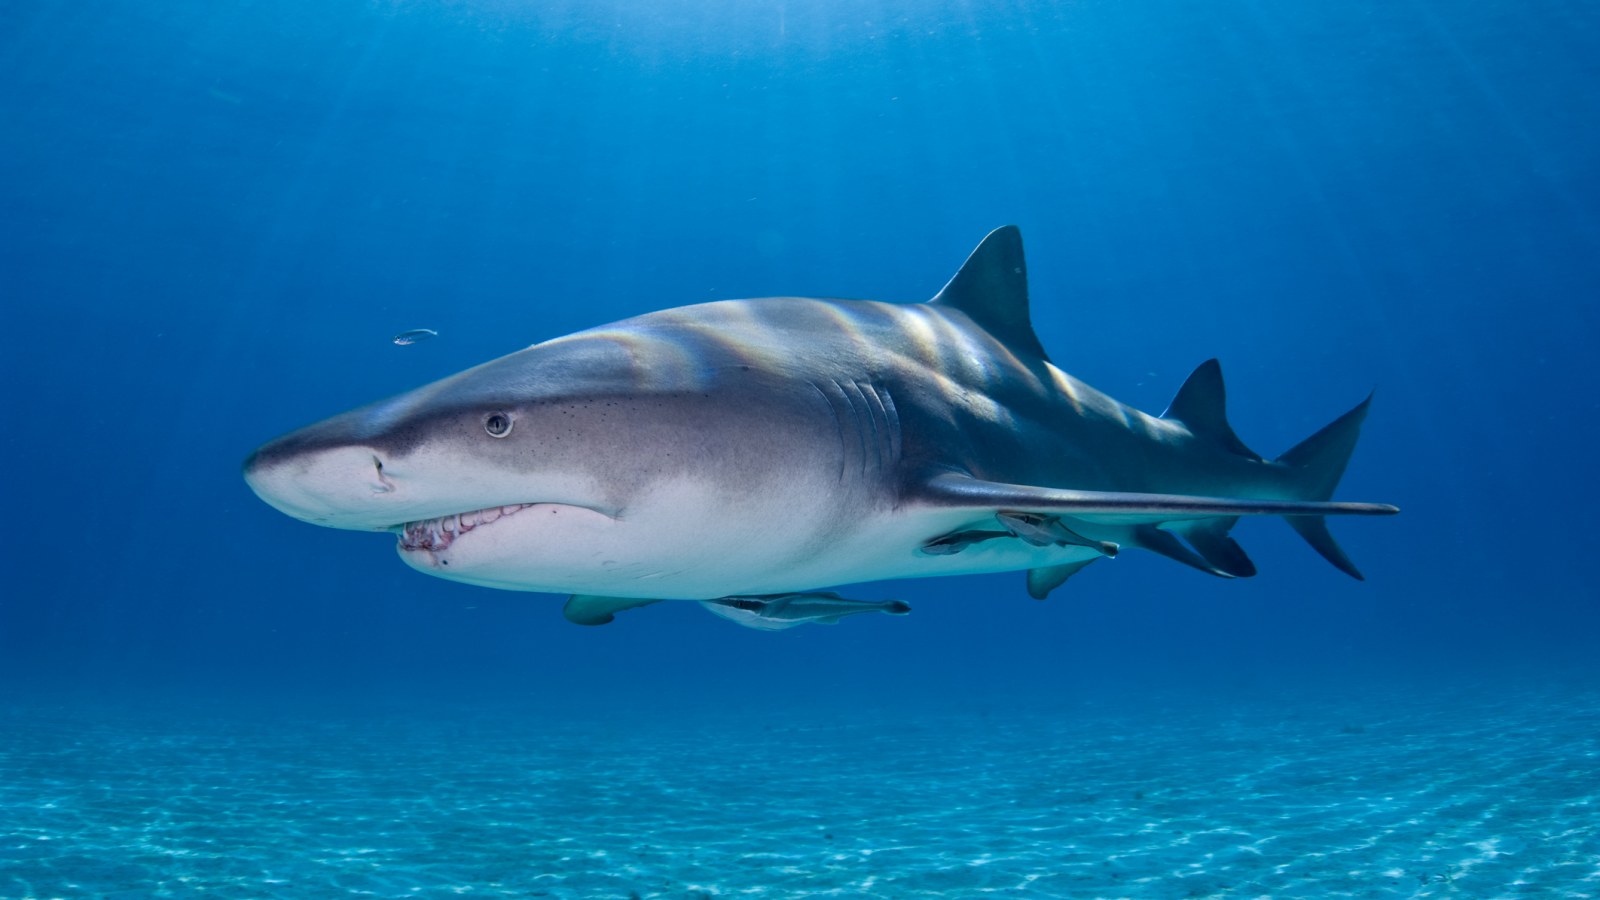 Lemon Shark Bites 7 Year Old Girl In Second Attack By Great Barrier Reef In Two Weeks